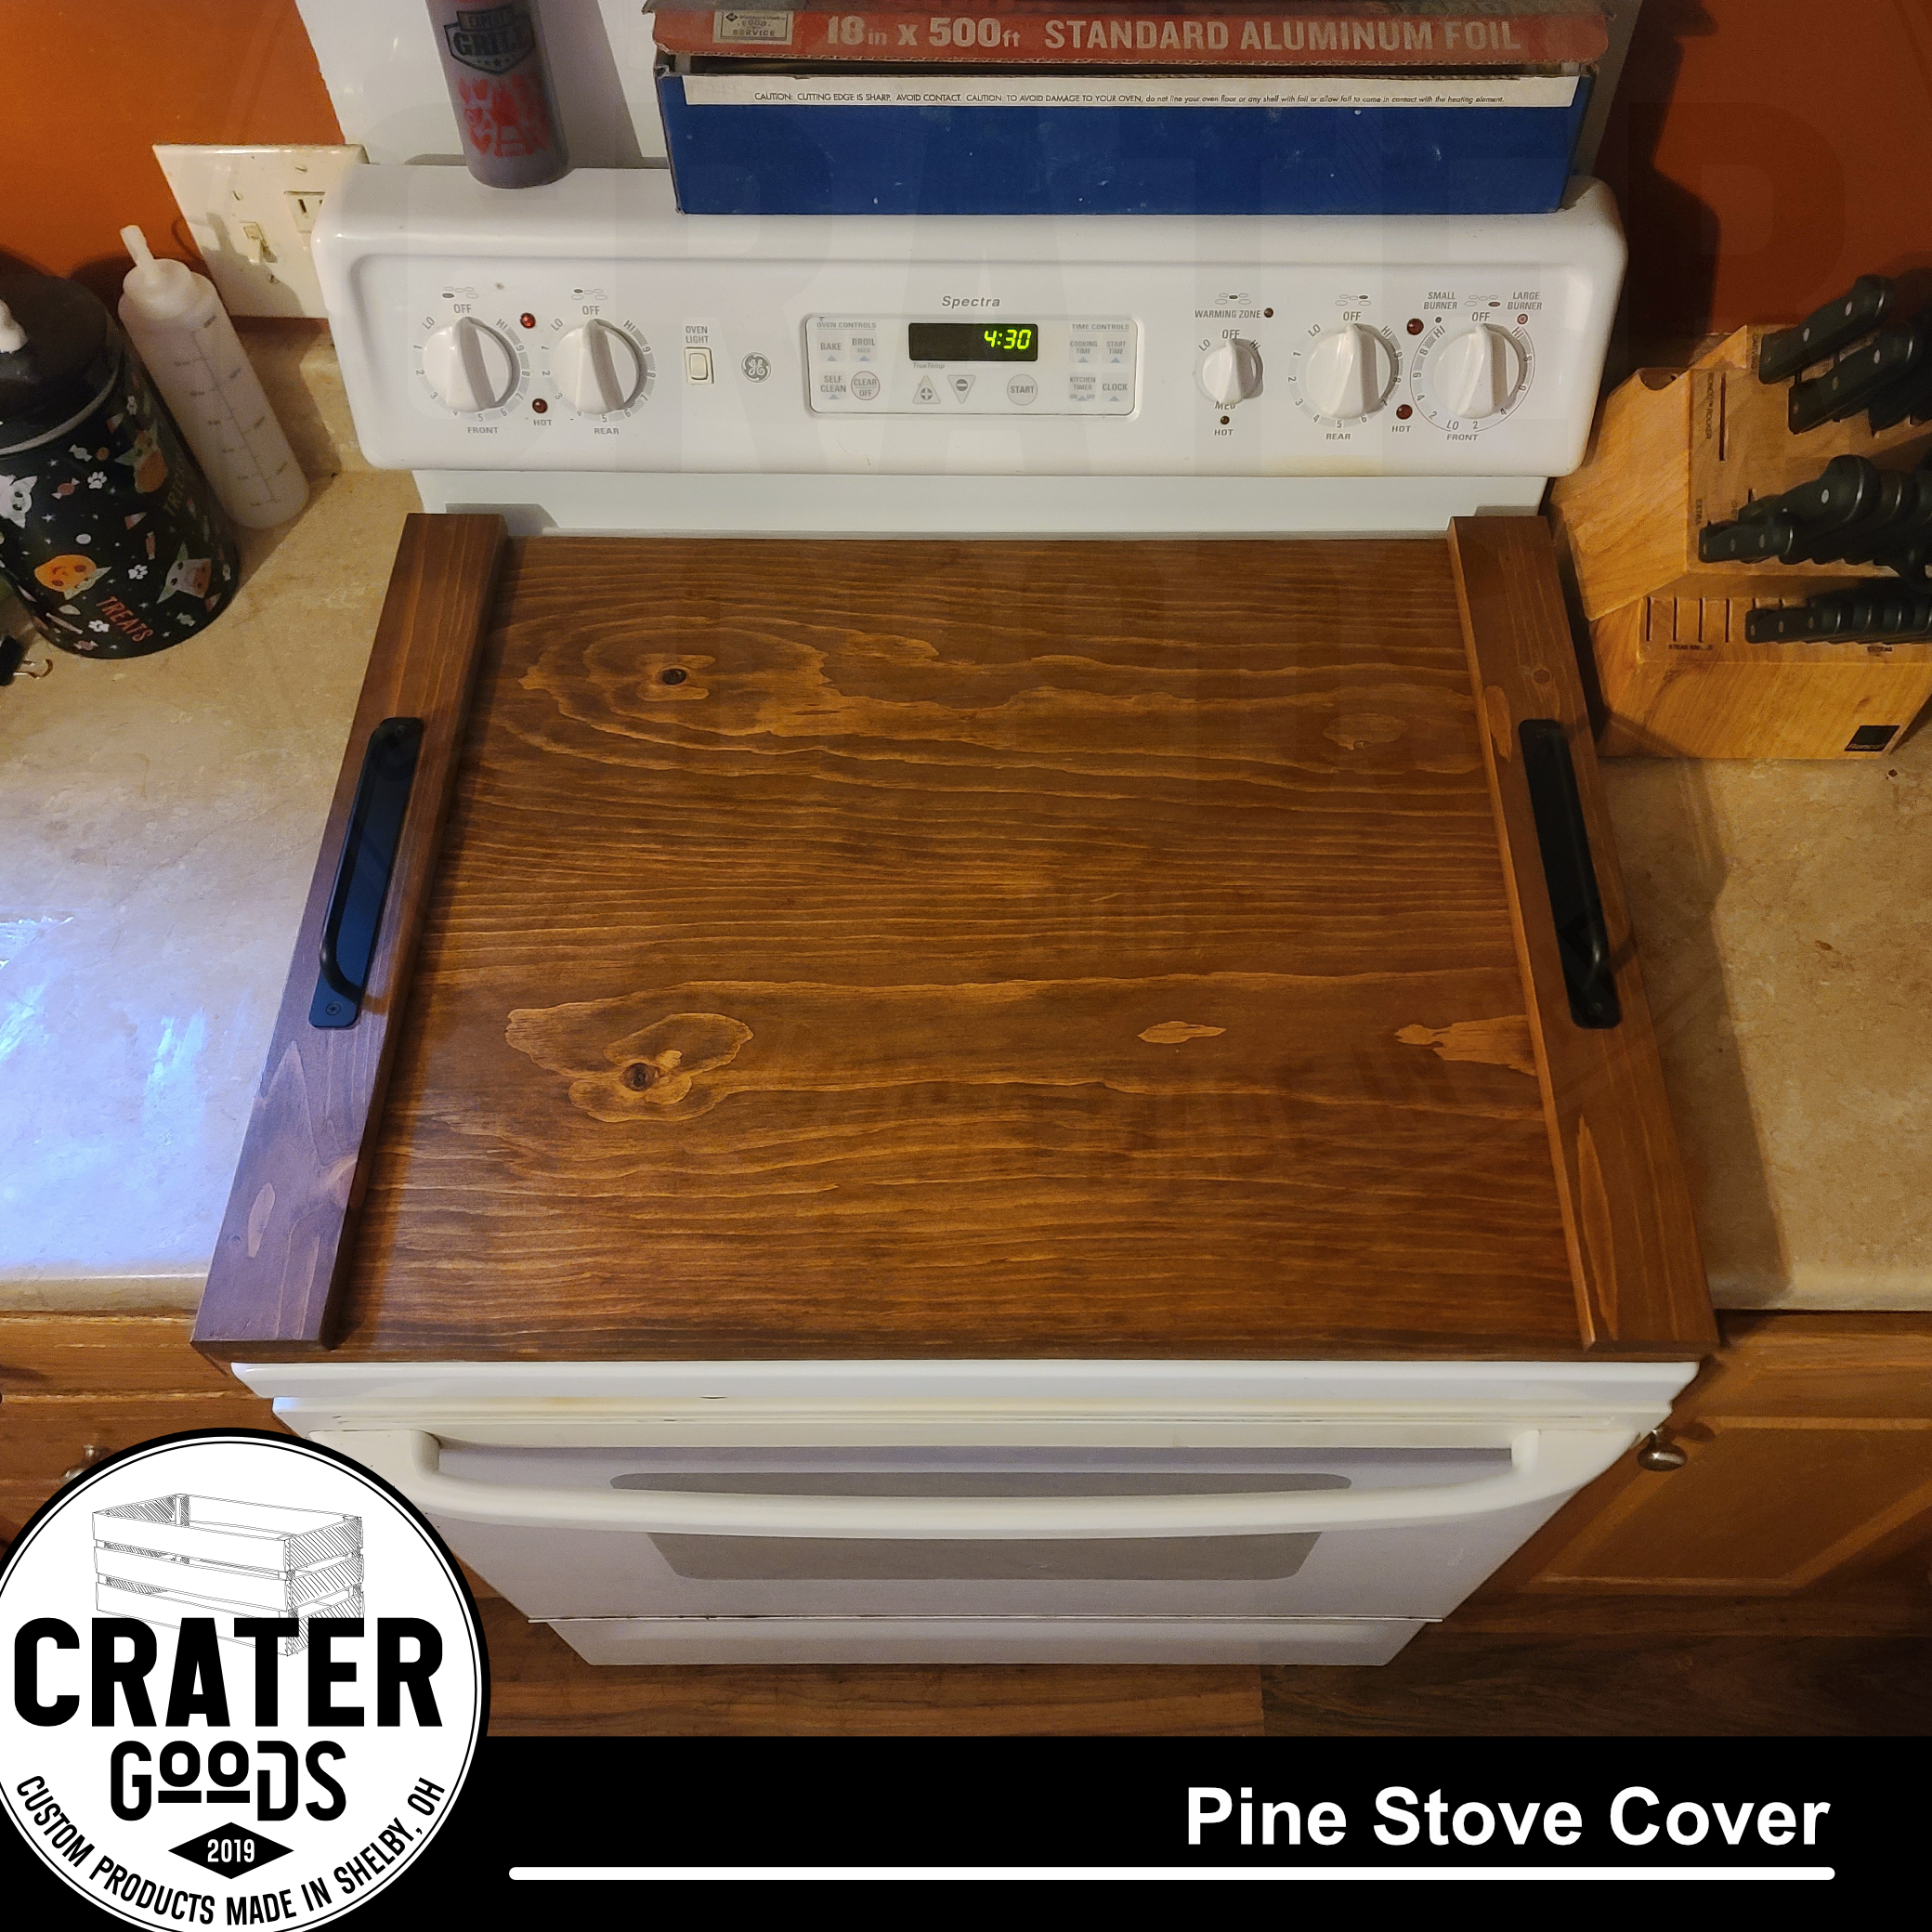 Pine Stove Cover